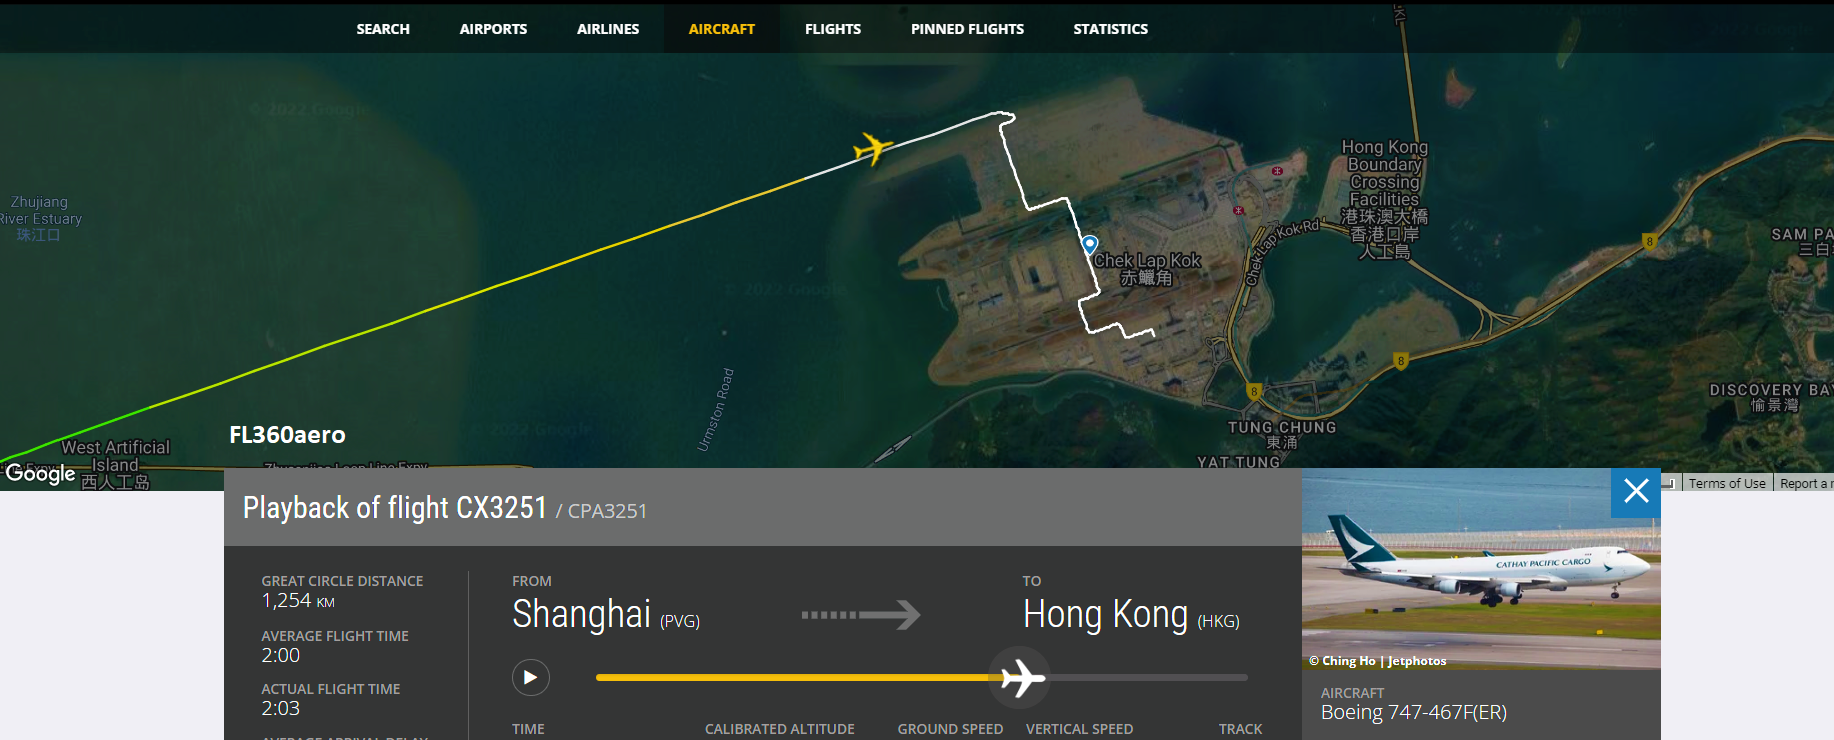 Third  Runway of the three-runway  System  (3RS)  comes  alive  at  Hong Kong  International  Airport ,  Cathay  Pacific  first  Airline  to  land   !